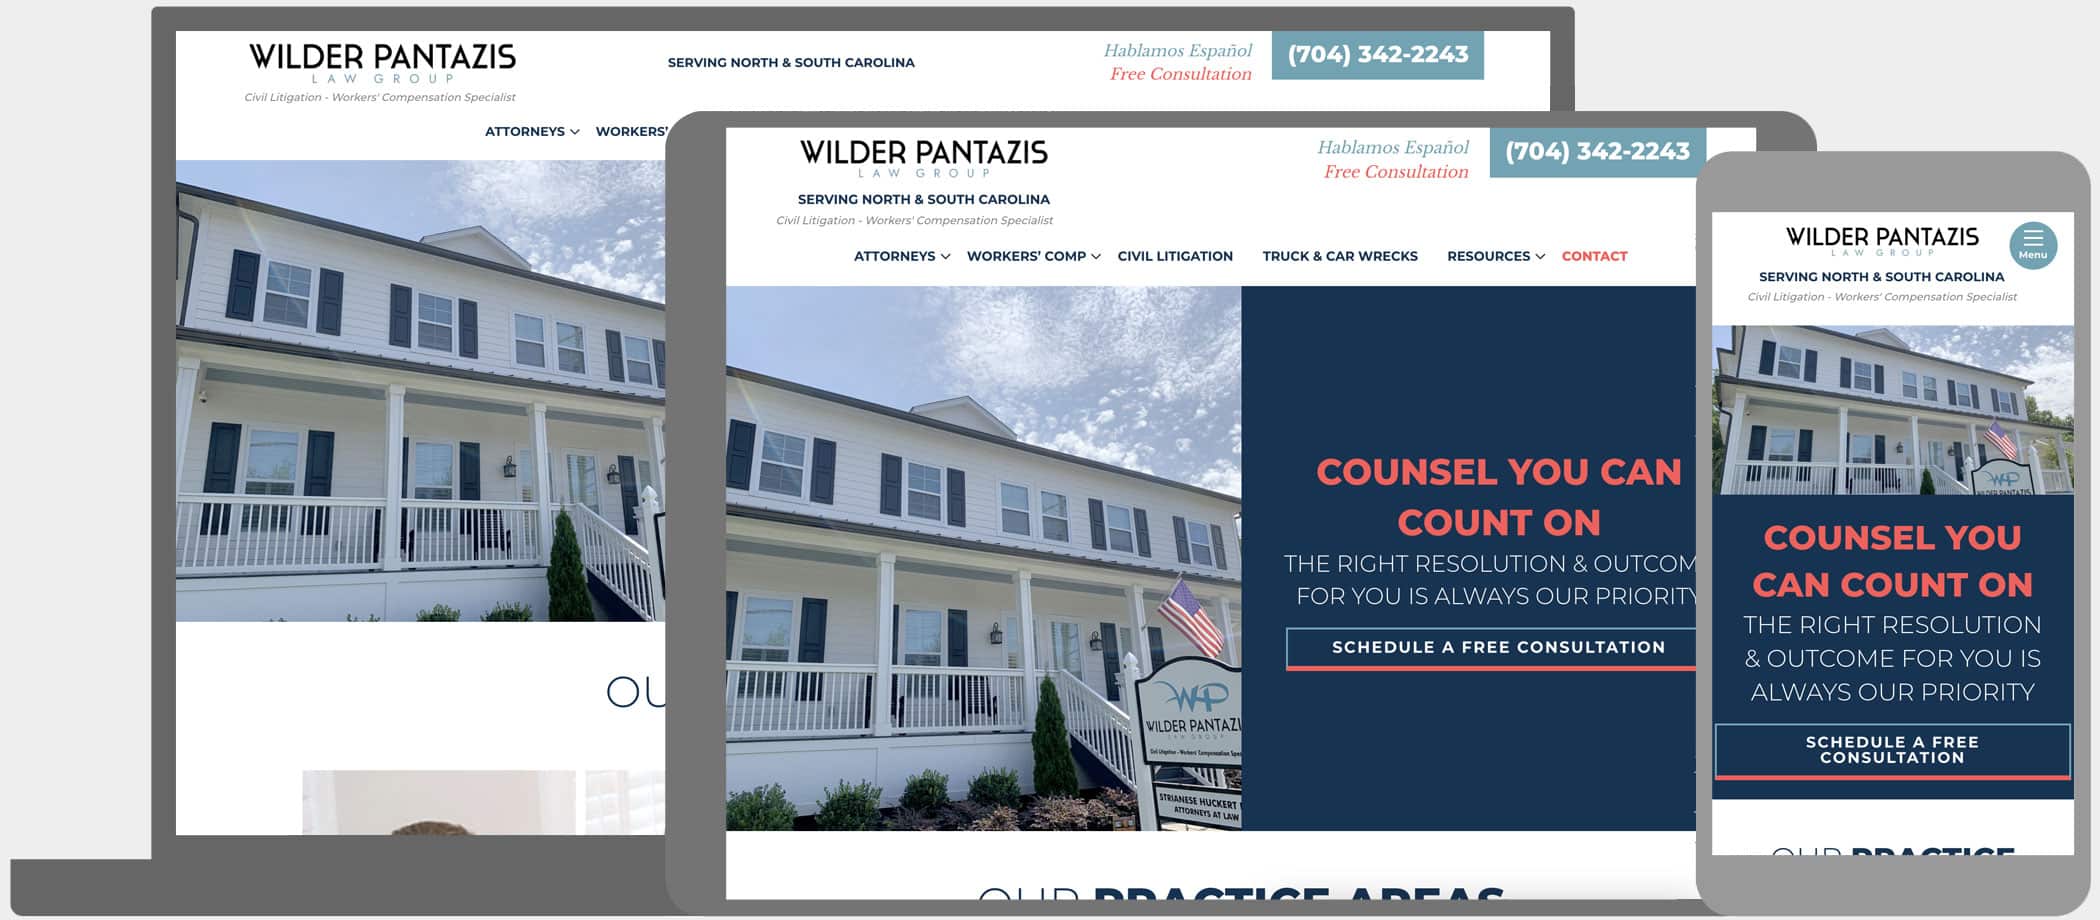 Wilder Pantazis Law Group: Better web design, better search rankings, and better leads after a partnership with Enjuris.